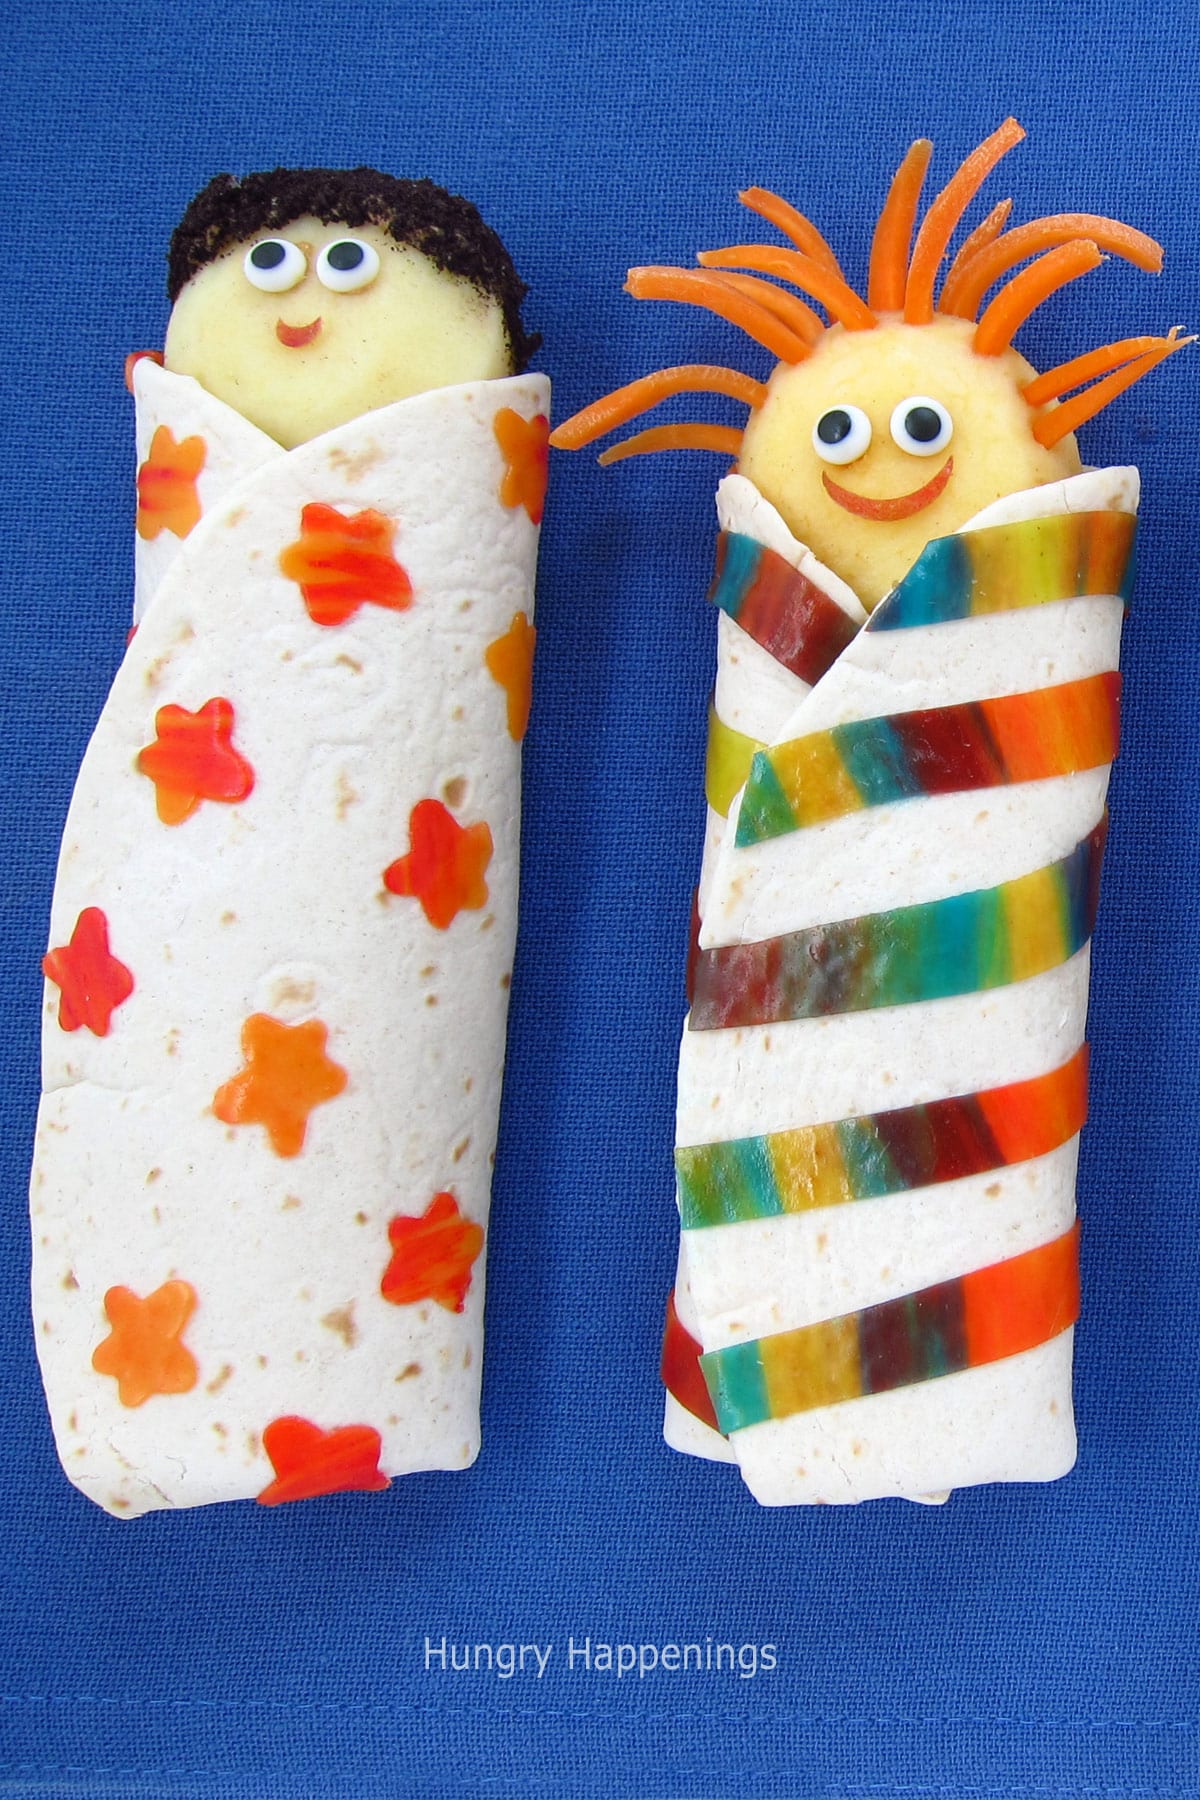 tortilla wrap sandwich that's decorated to look like a kid in a sleeping bag. 